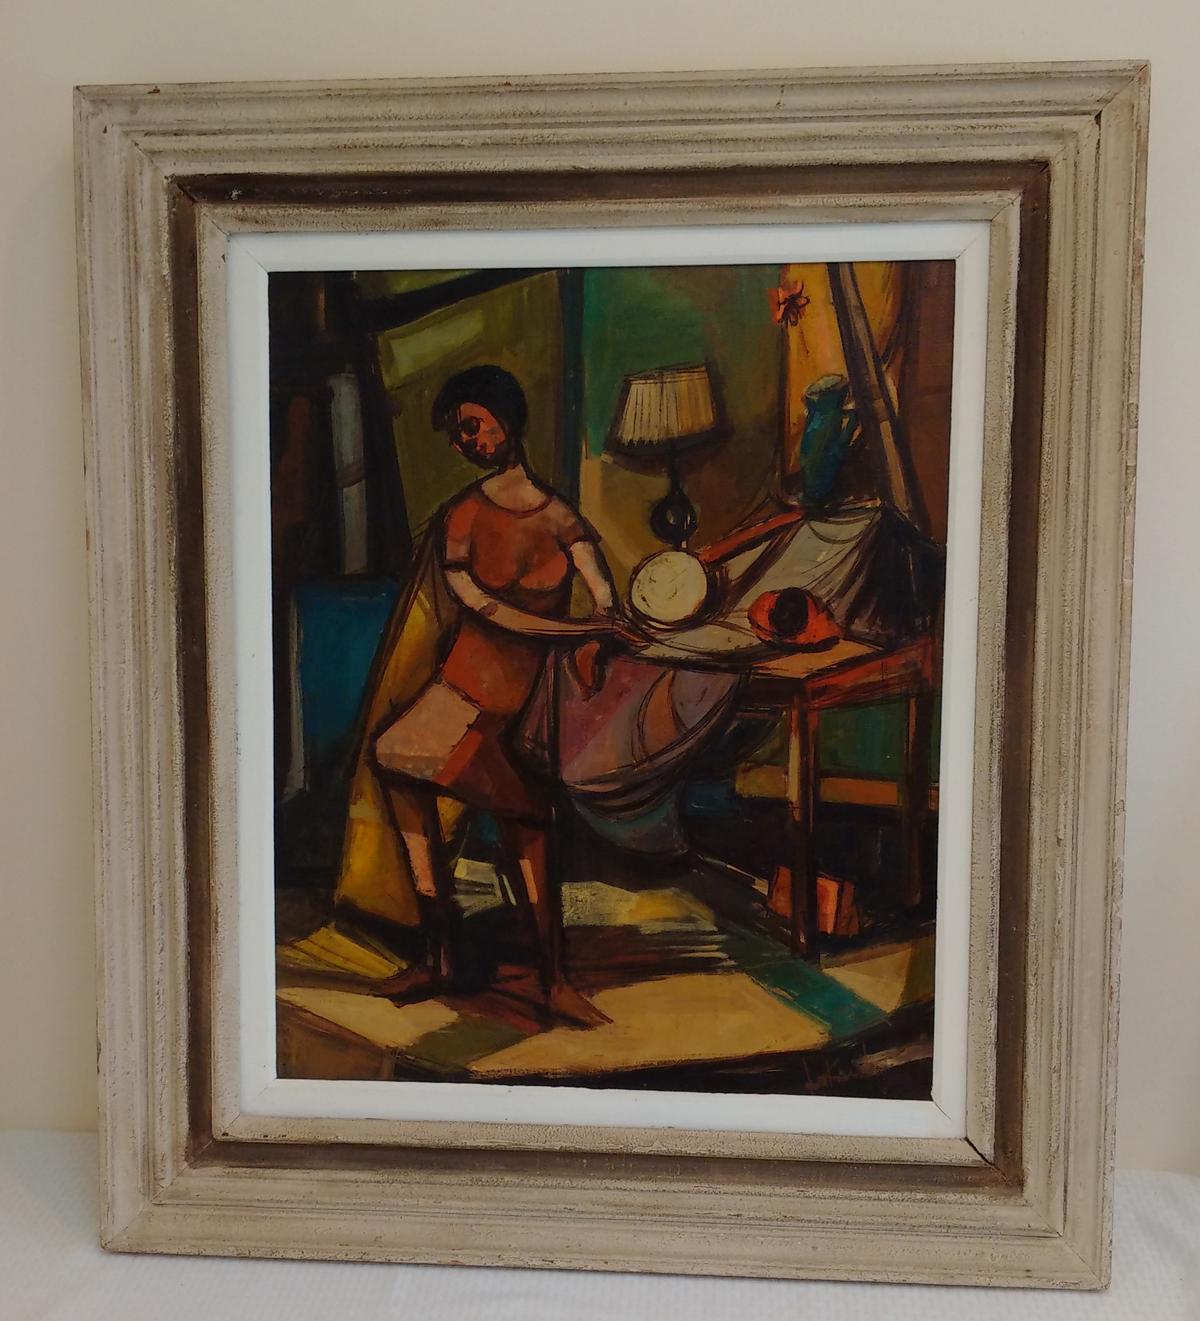 Large Painting Andrew Lukach Woman Abstract Expressionist Artist Signed 35x41 Art Framed Old Frame